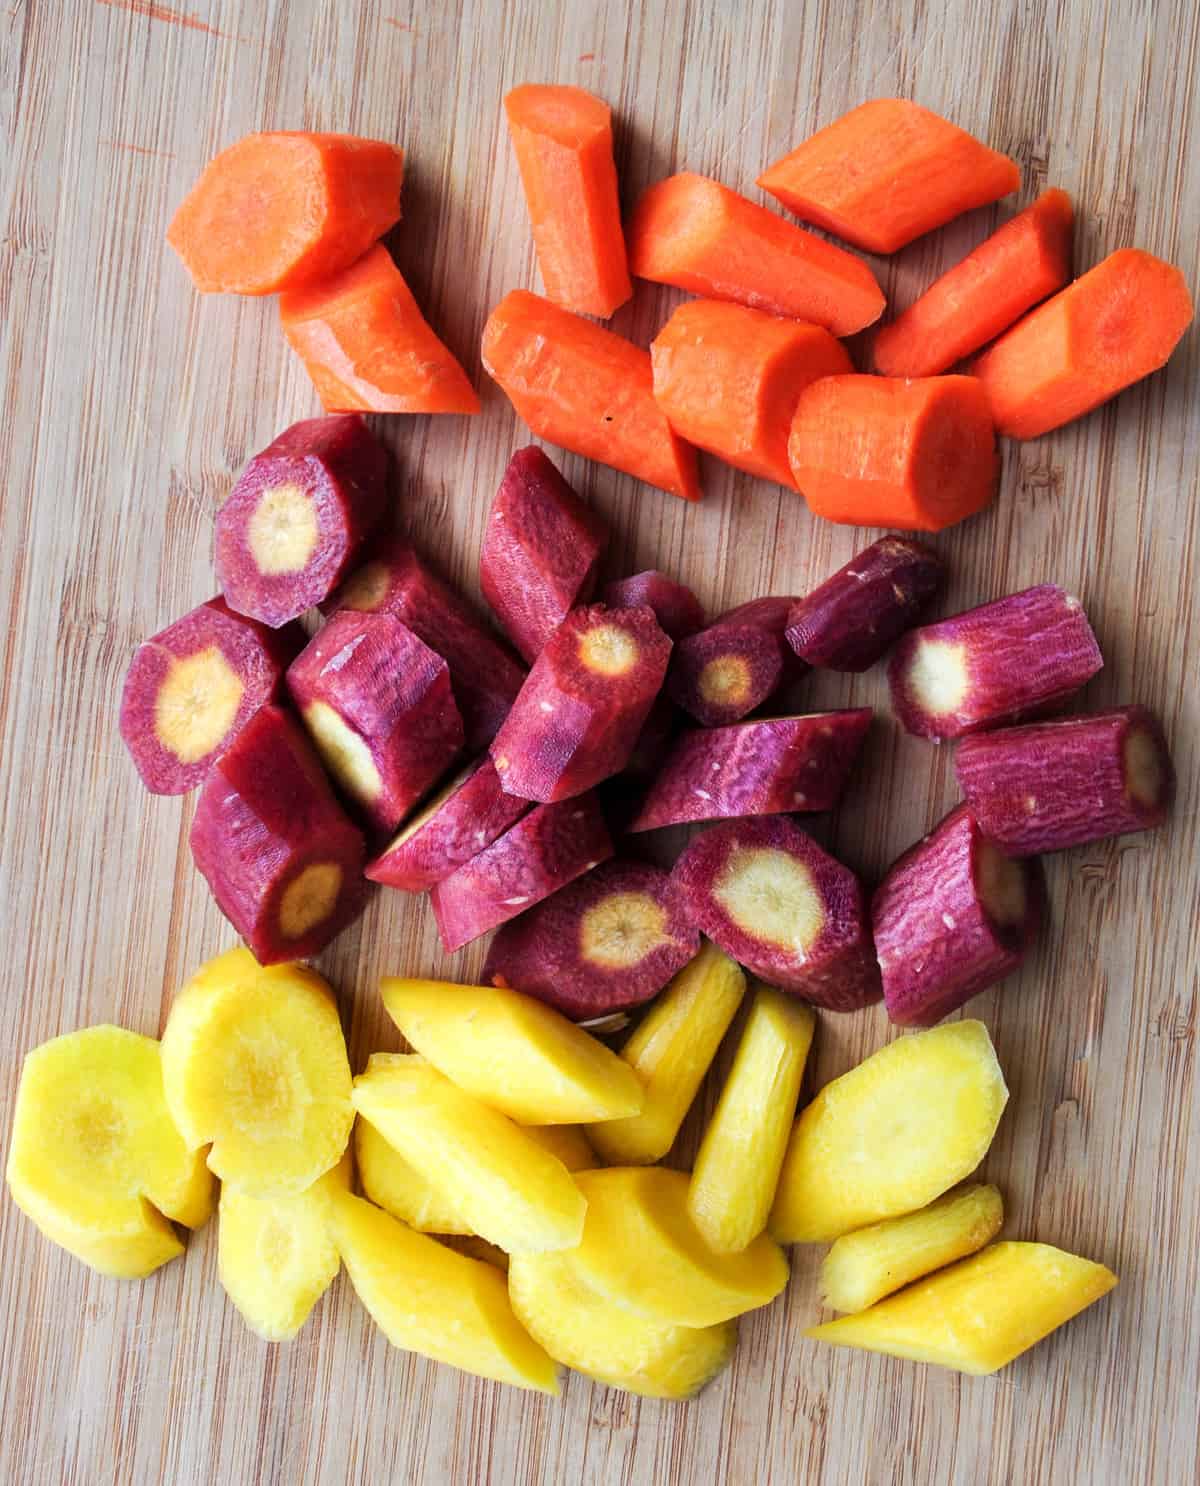 Chopped tri-colored carrots